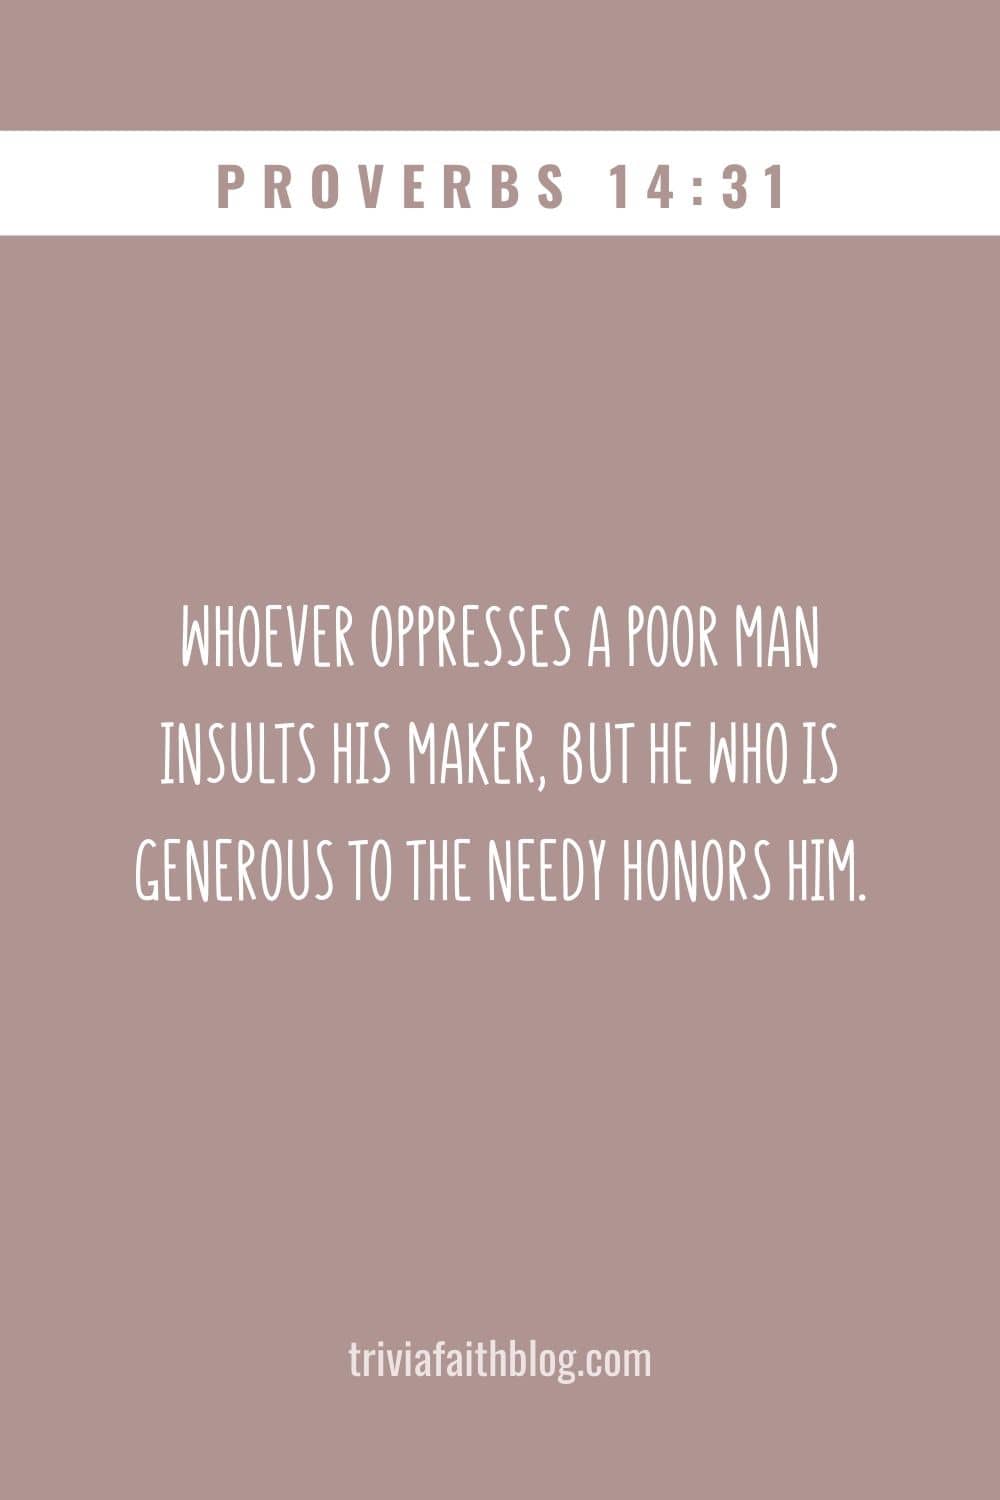 Whoever oppresses a poor man insults his Maker, but he who is generous to the needy honors him